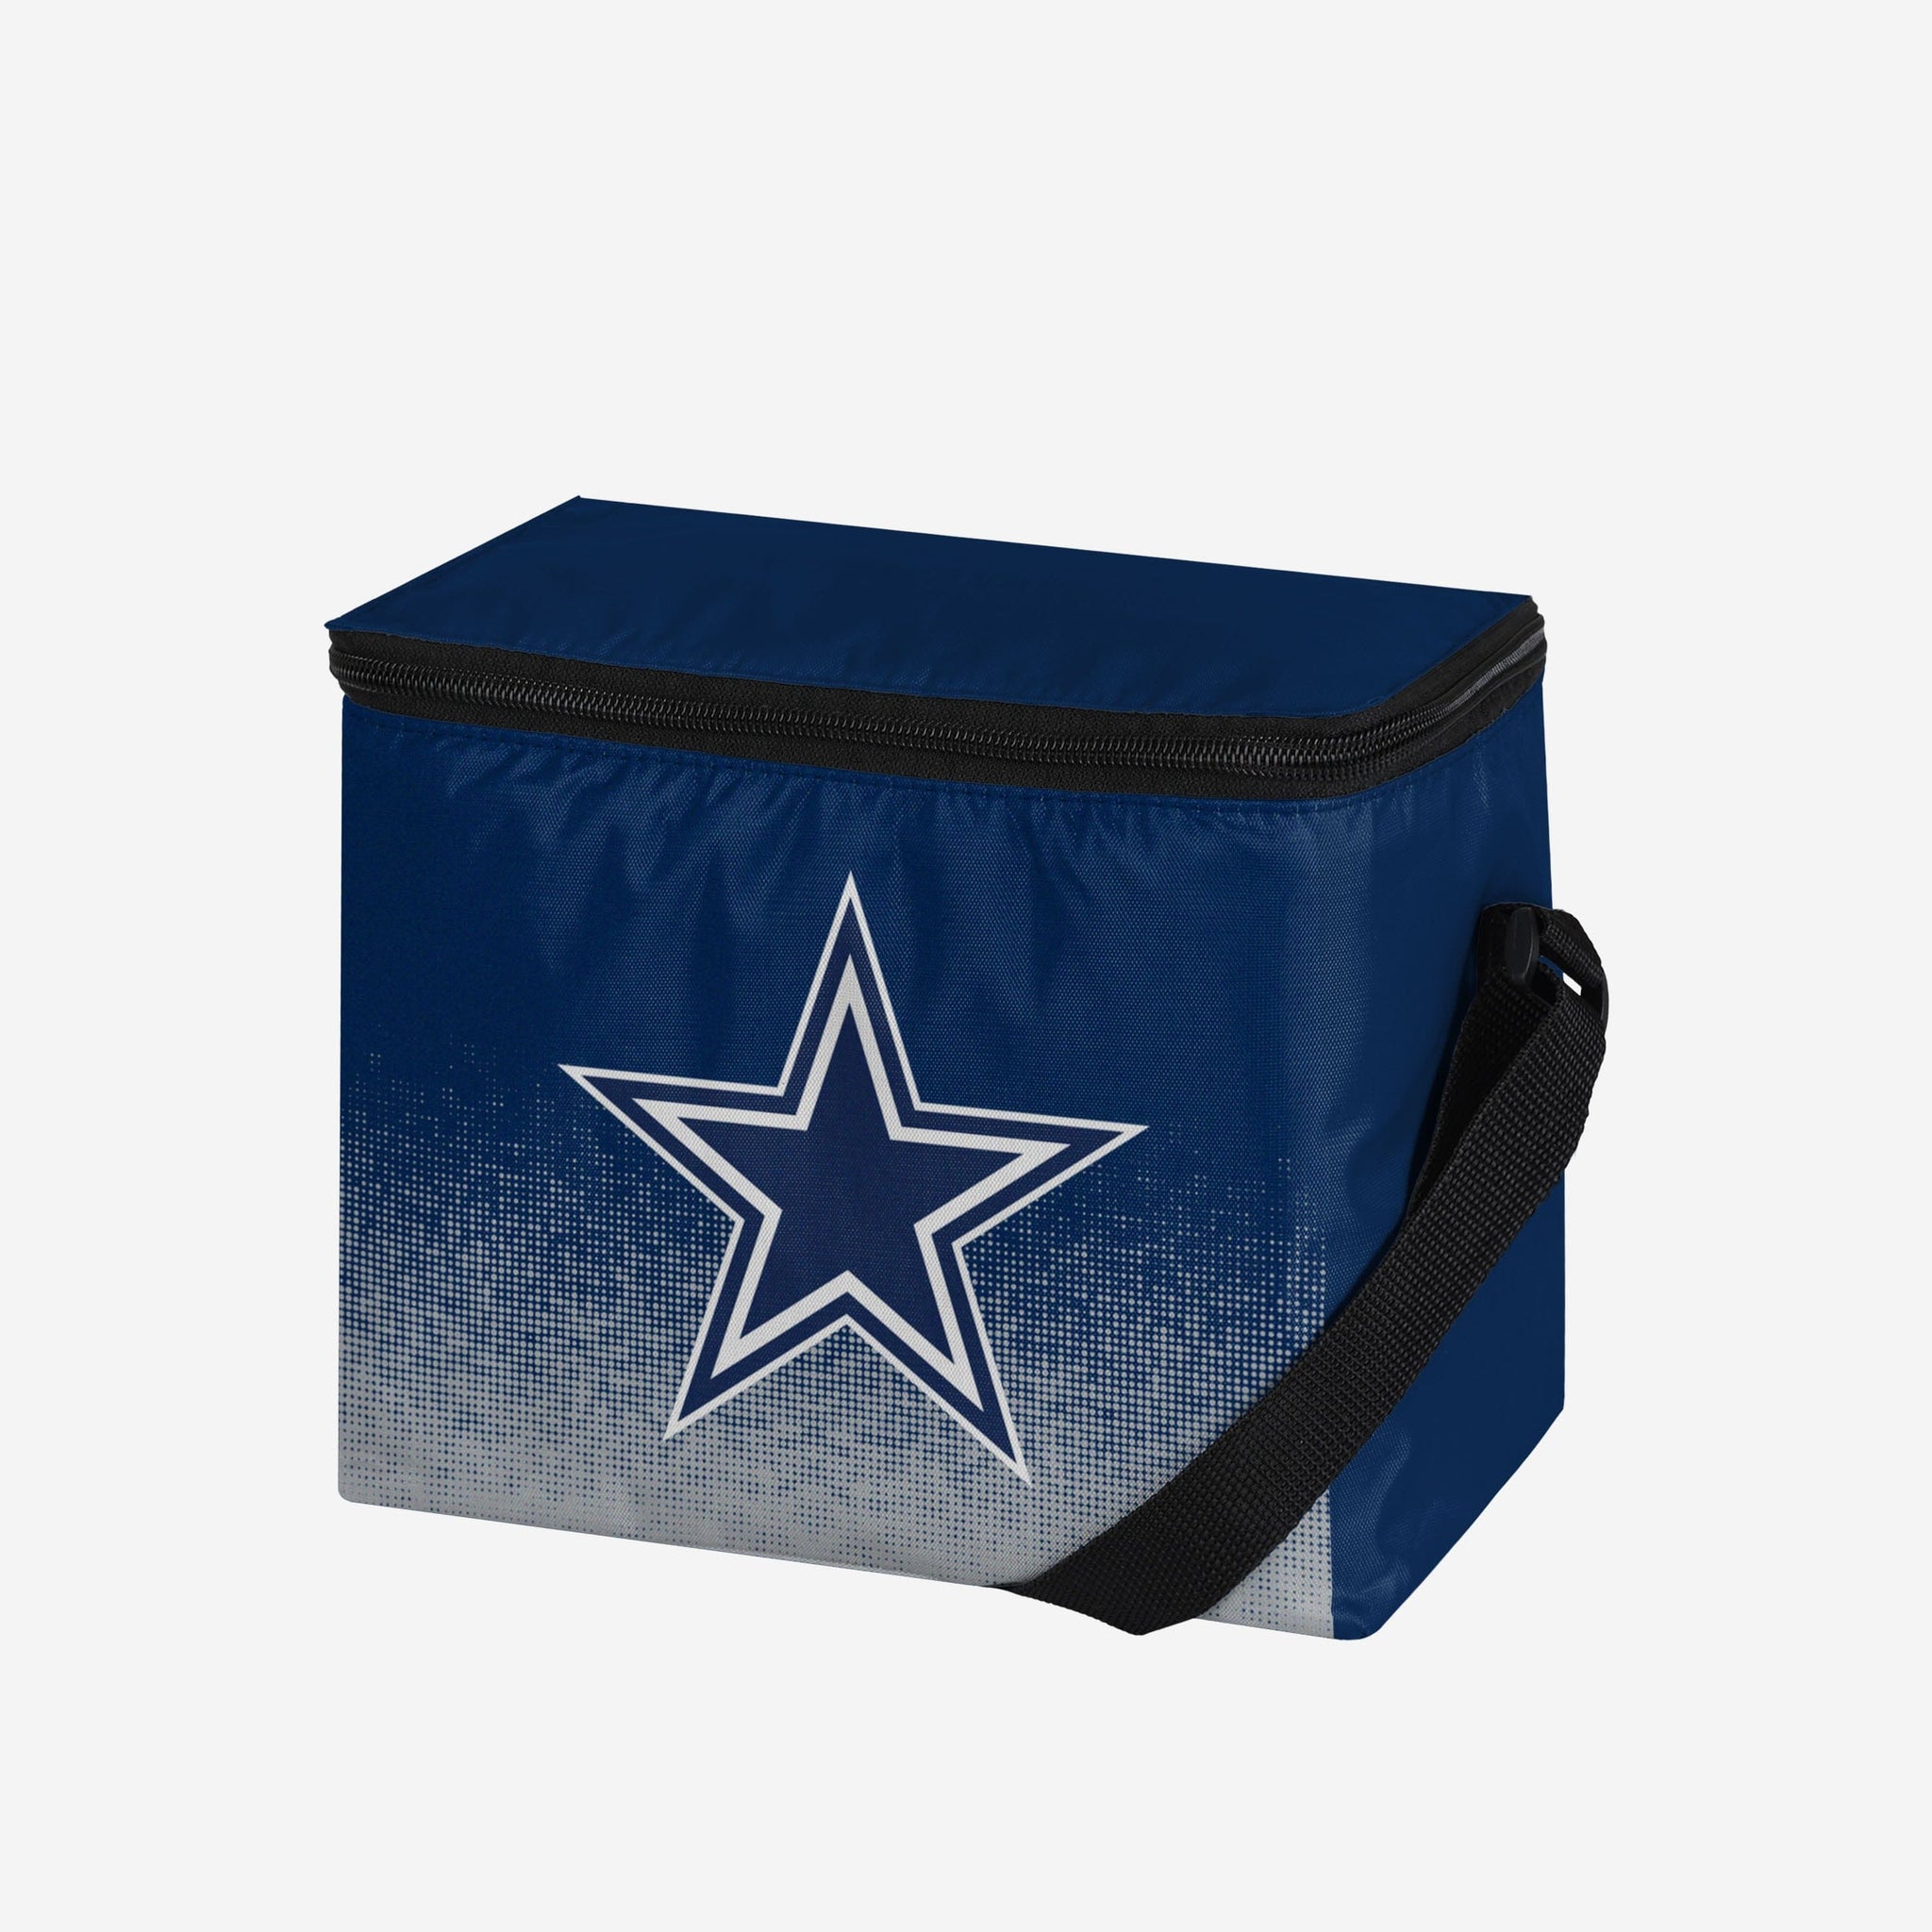 dallas cowboys ice chest with wheels